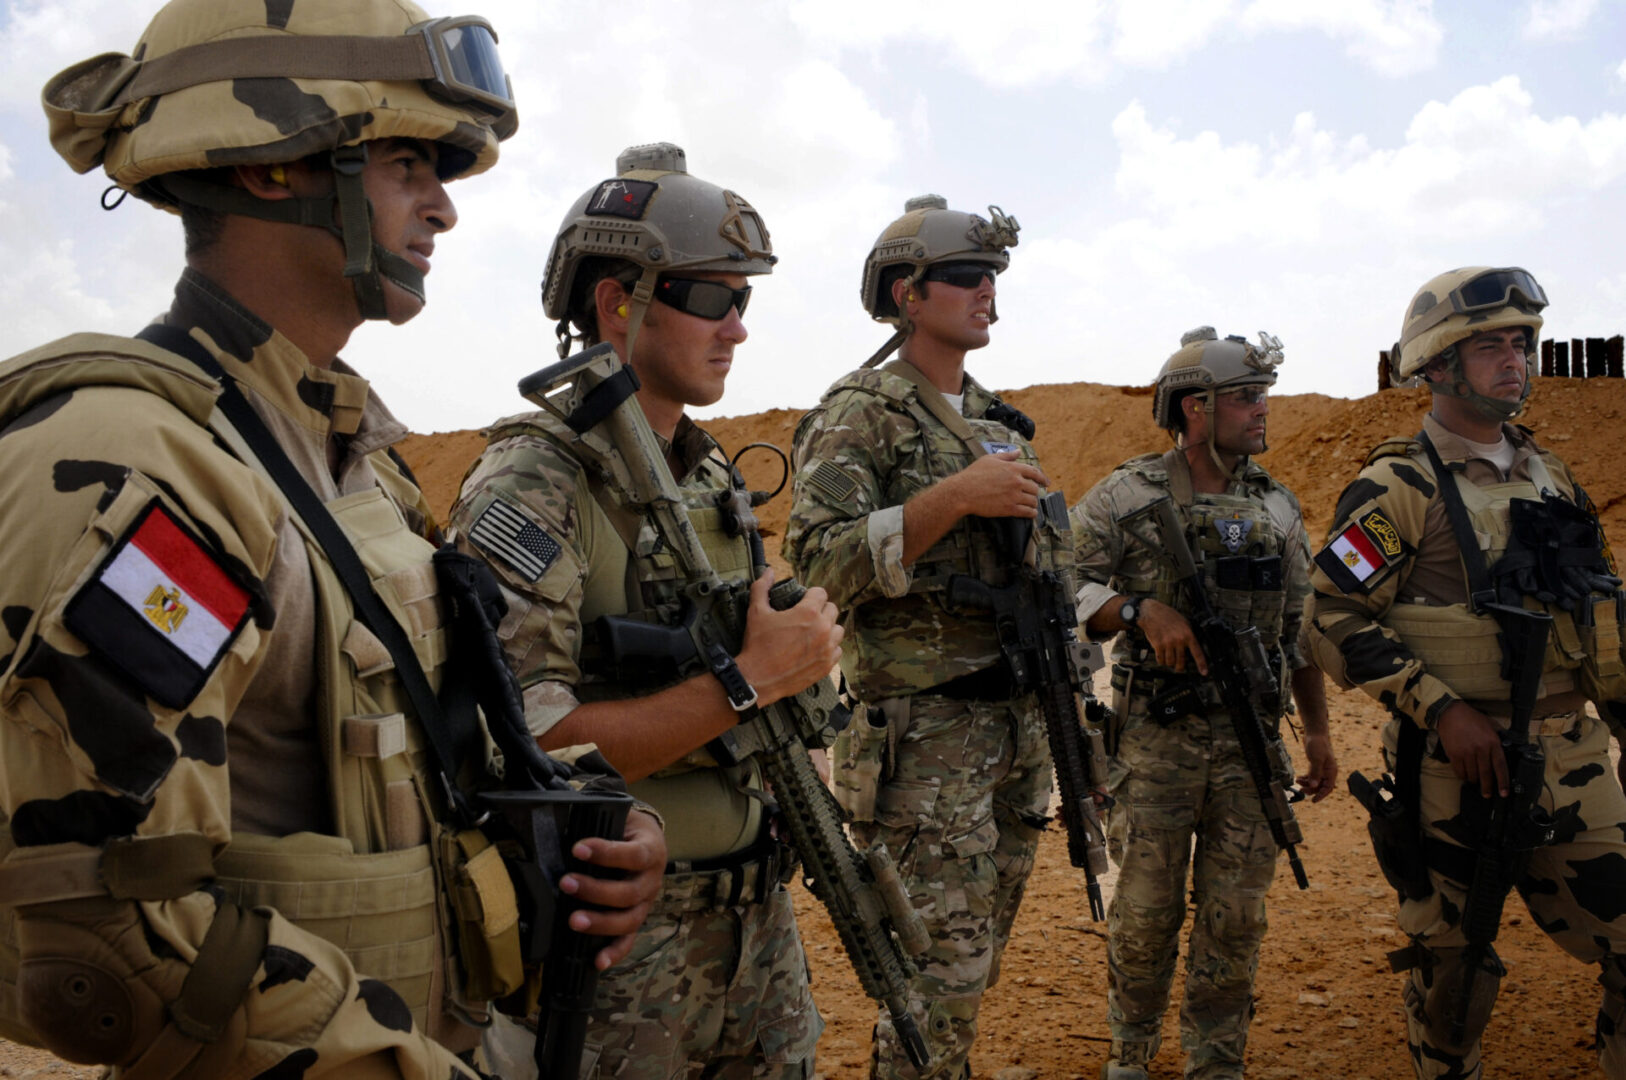 Egyptian and U.S. Special Operations Soldiers observe a small arms range, which was part of Exercise Bright Star. The exercise is held to promote and enhance regional security and cooperation between the seven participating nations, which include the Arab Republic of Egypt, the United States, Jordan, the Kingdom of Saudi Arabia, Greece, the United Kingdom, and France.